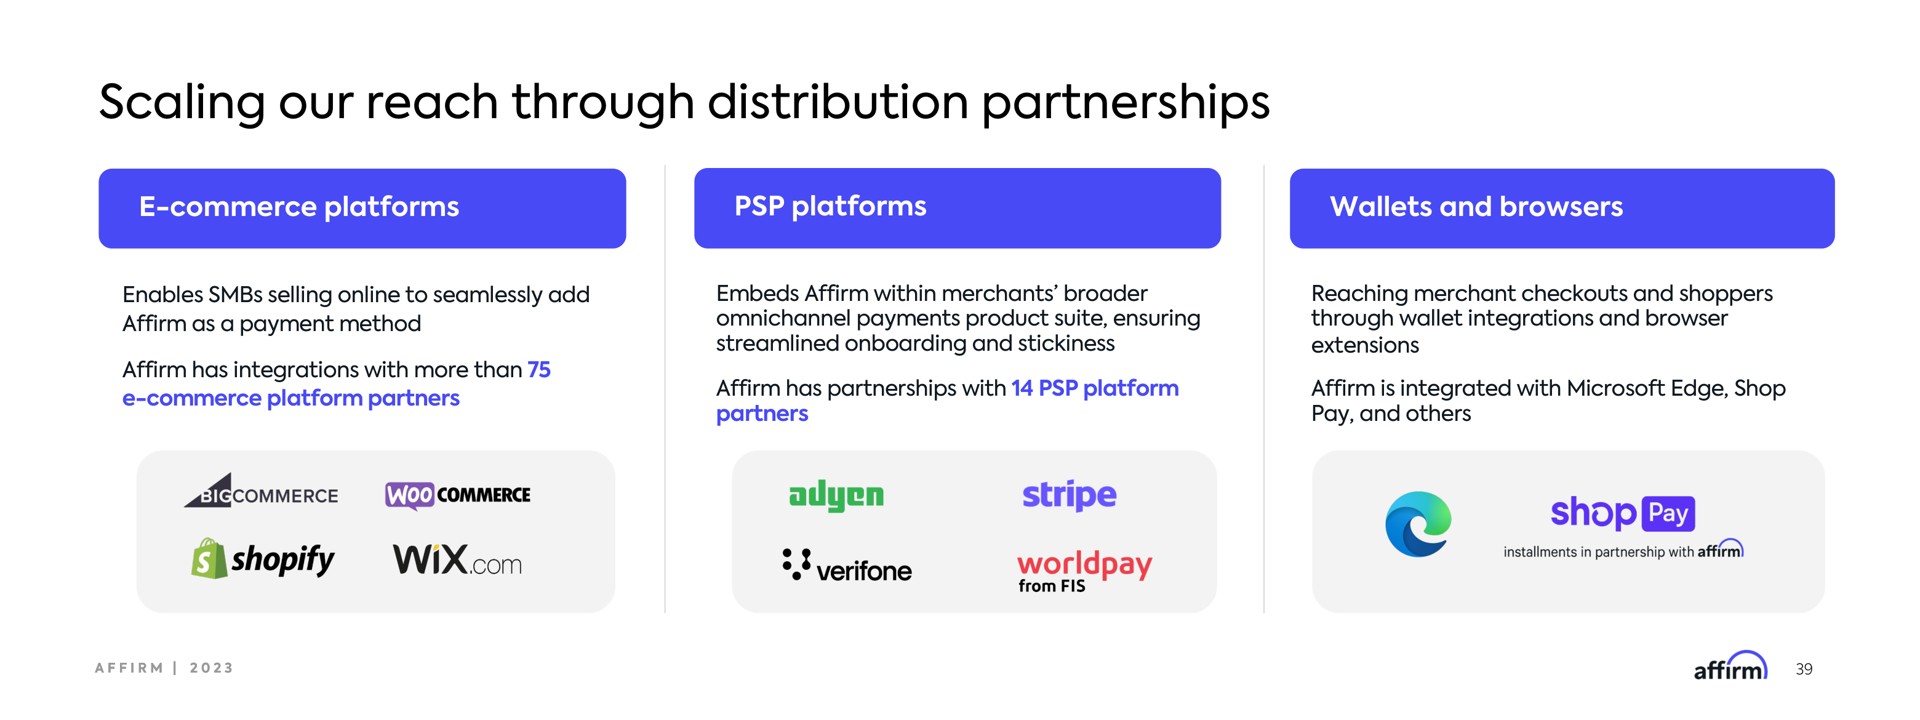 scaling our reach through distribution partnerships shop | Affirm